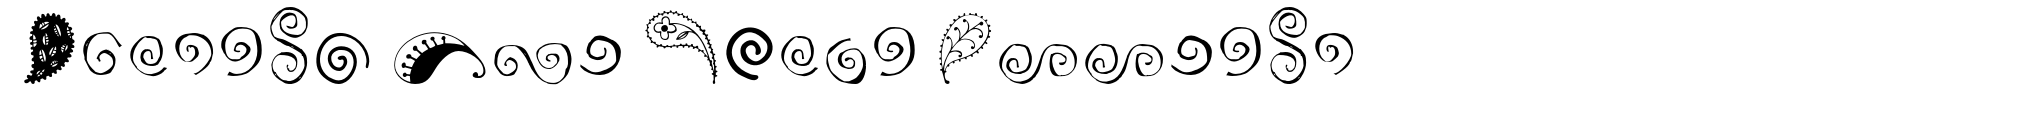 Paisley And Swirl Doodles image